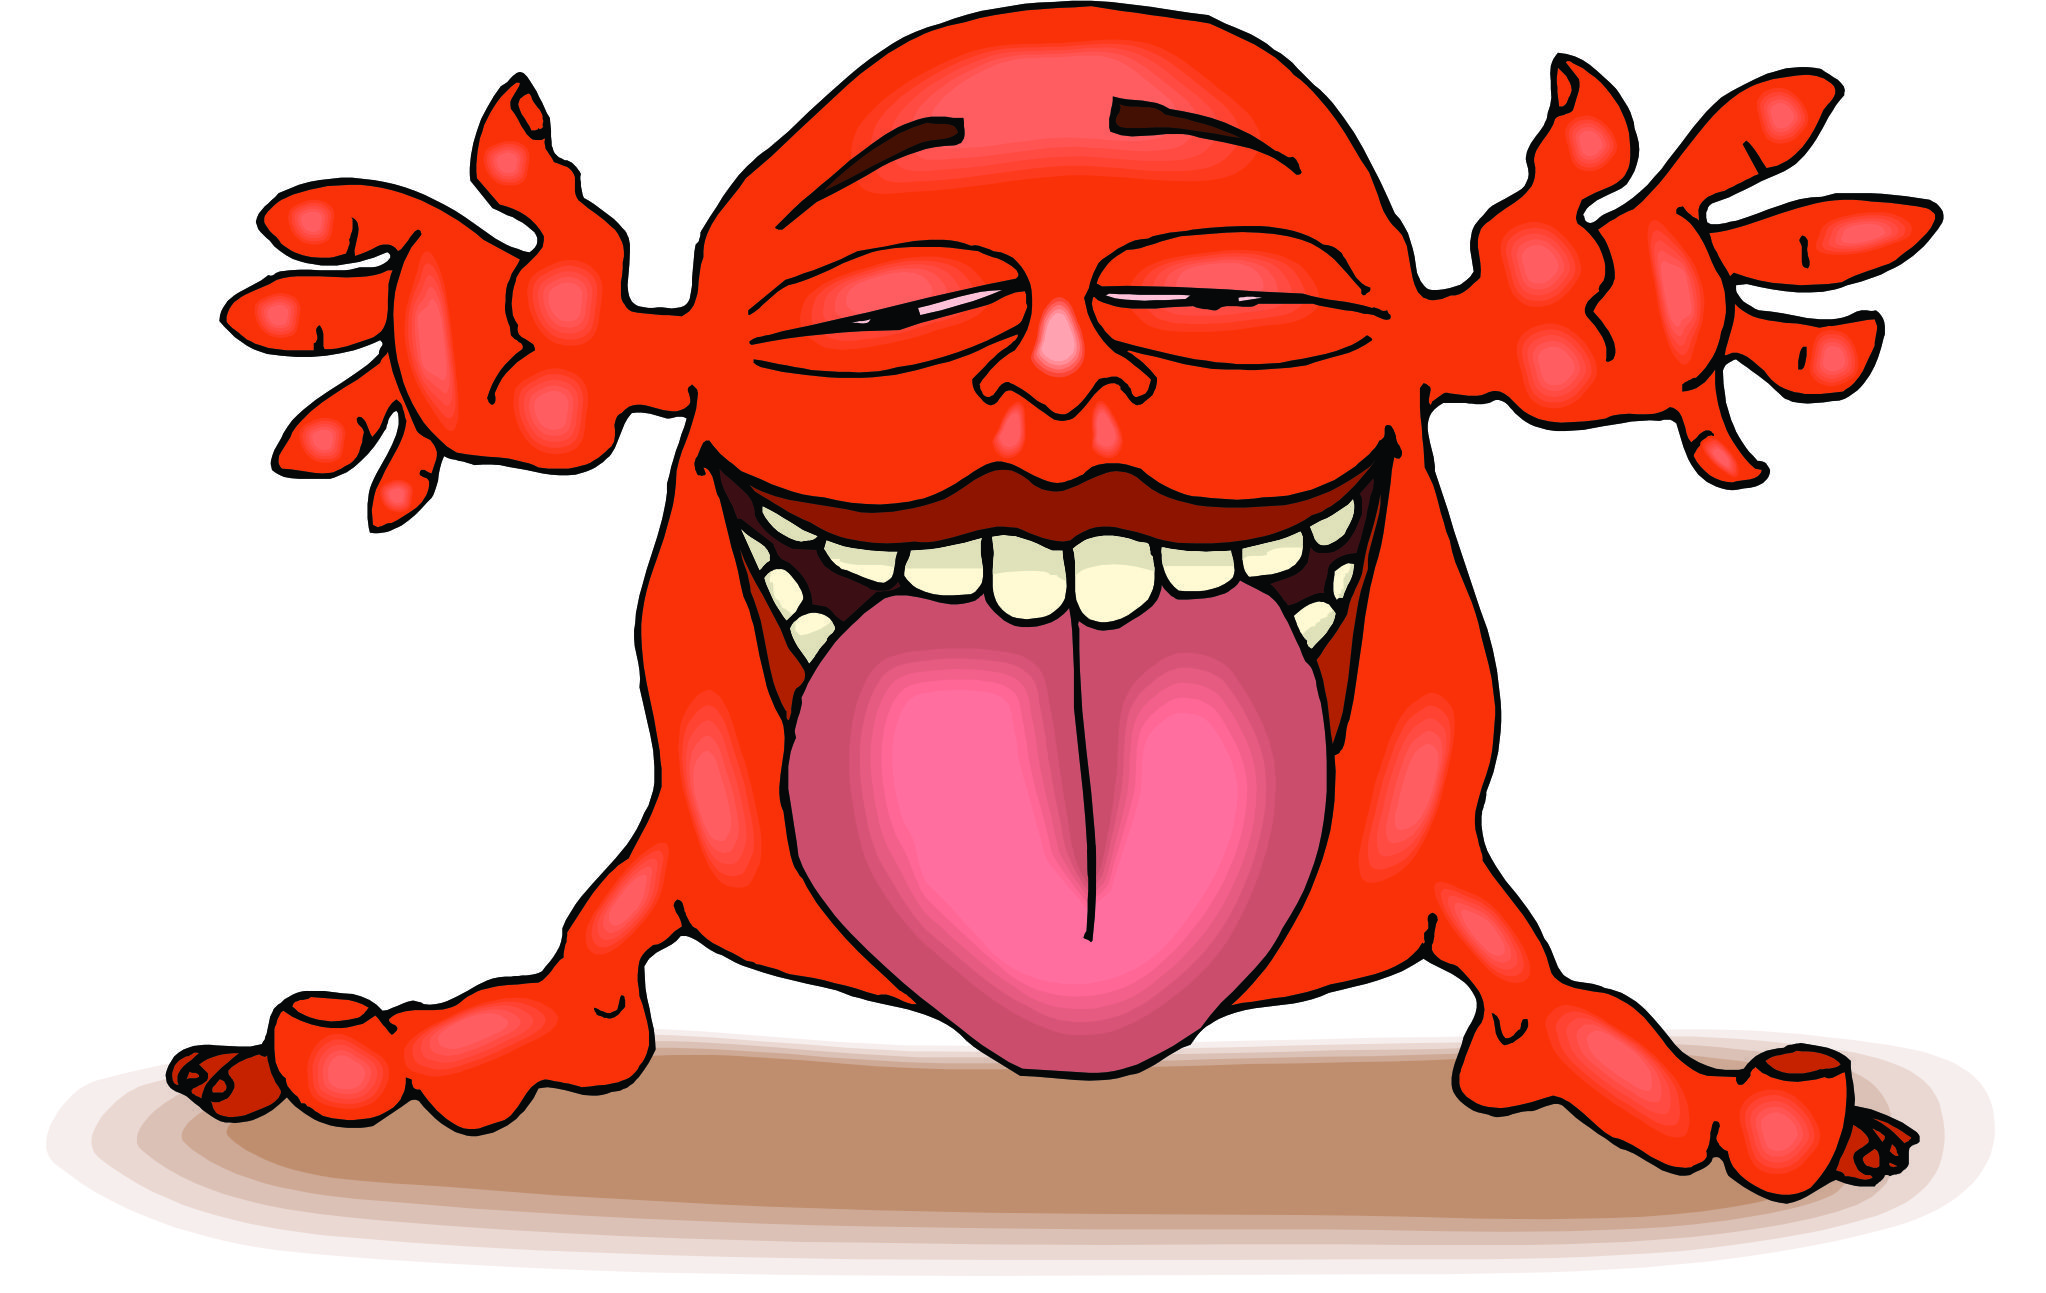 Smiley Faces With Tongue Out - ClipArt Best